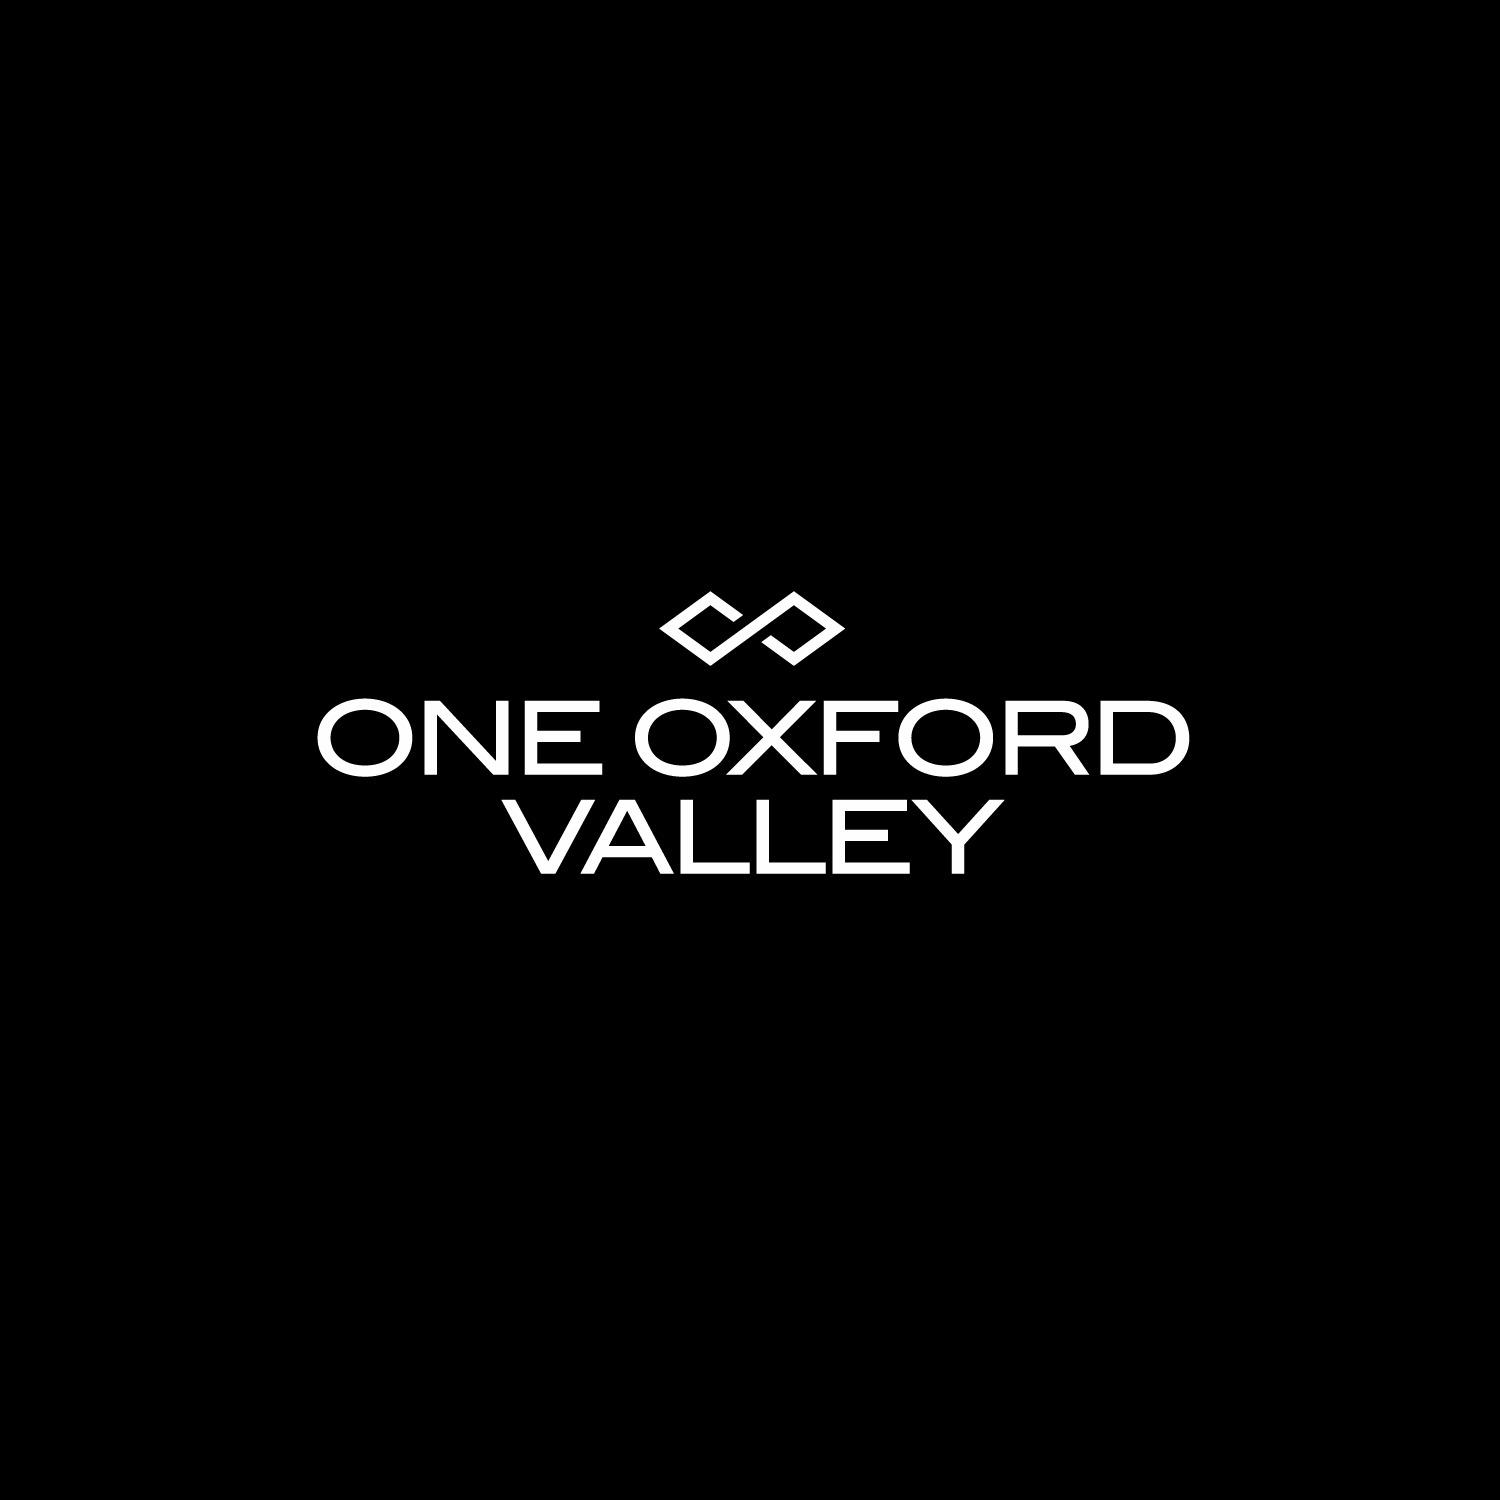 One Oxford Valley